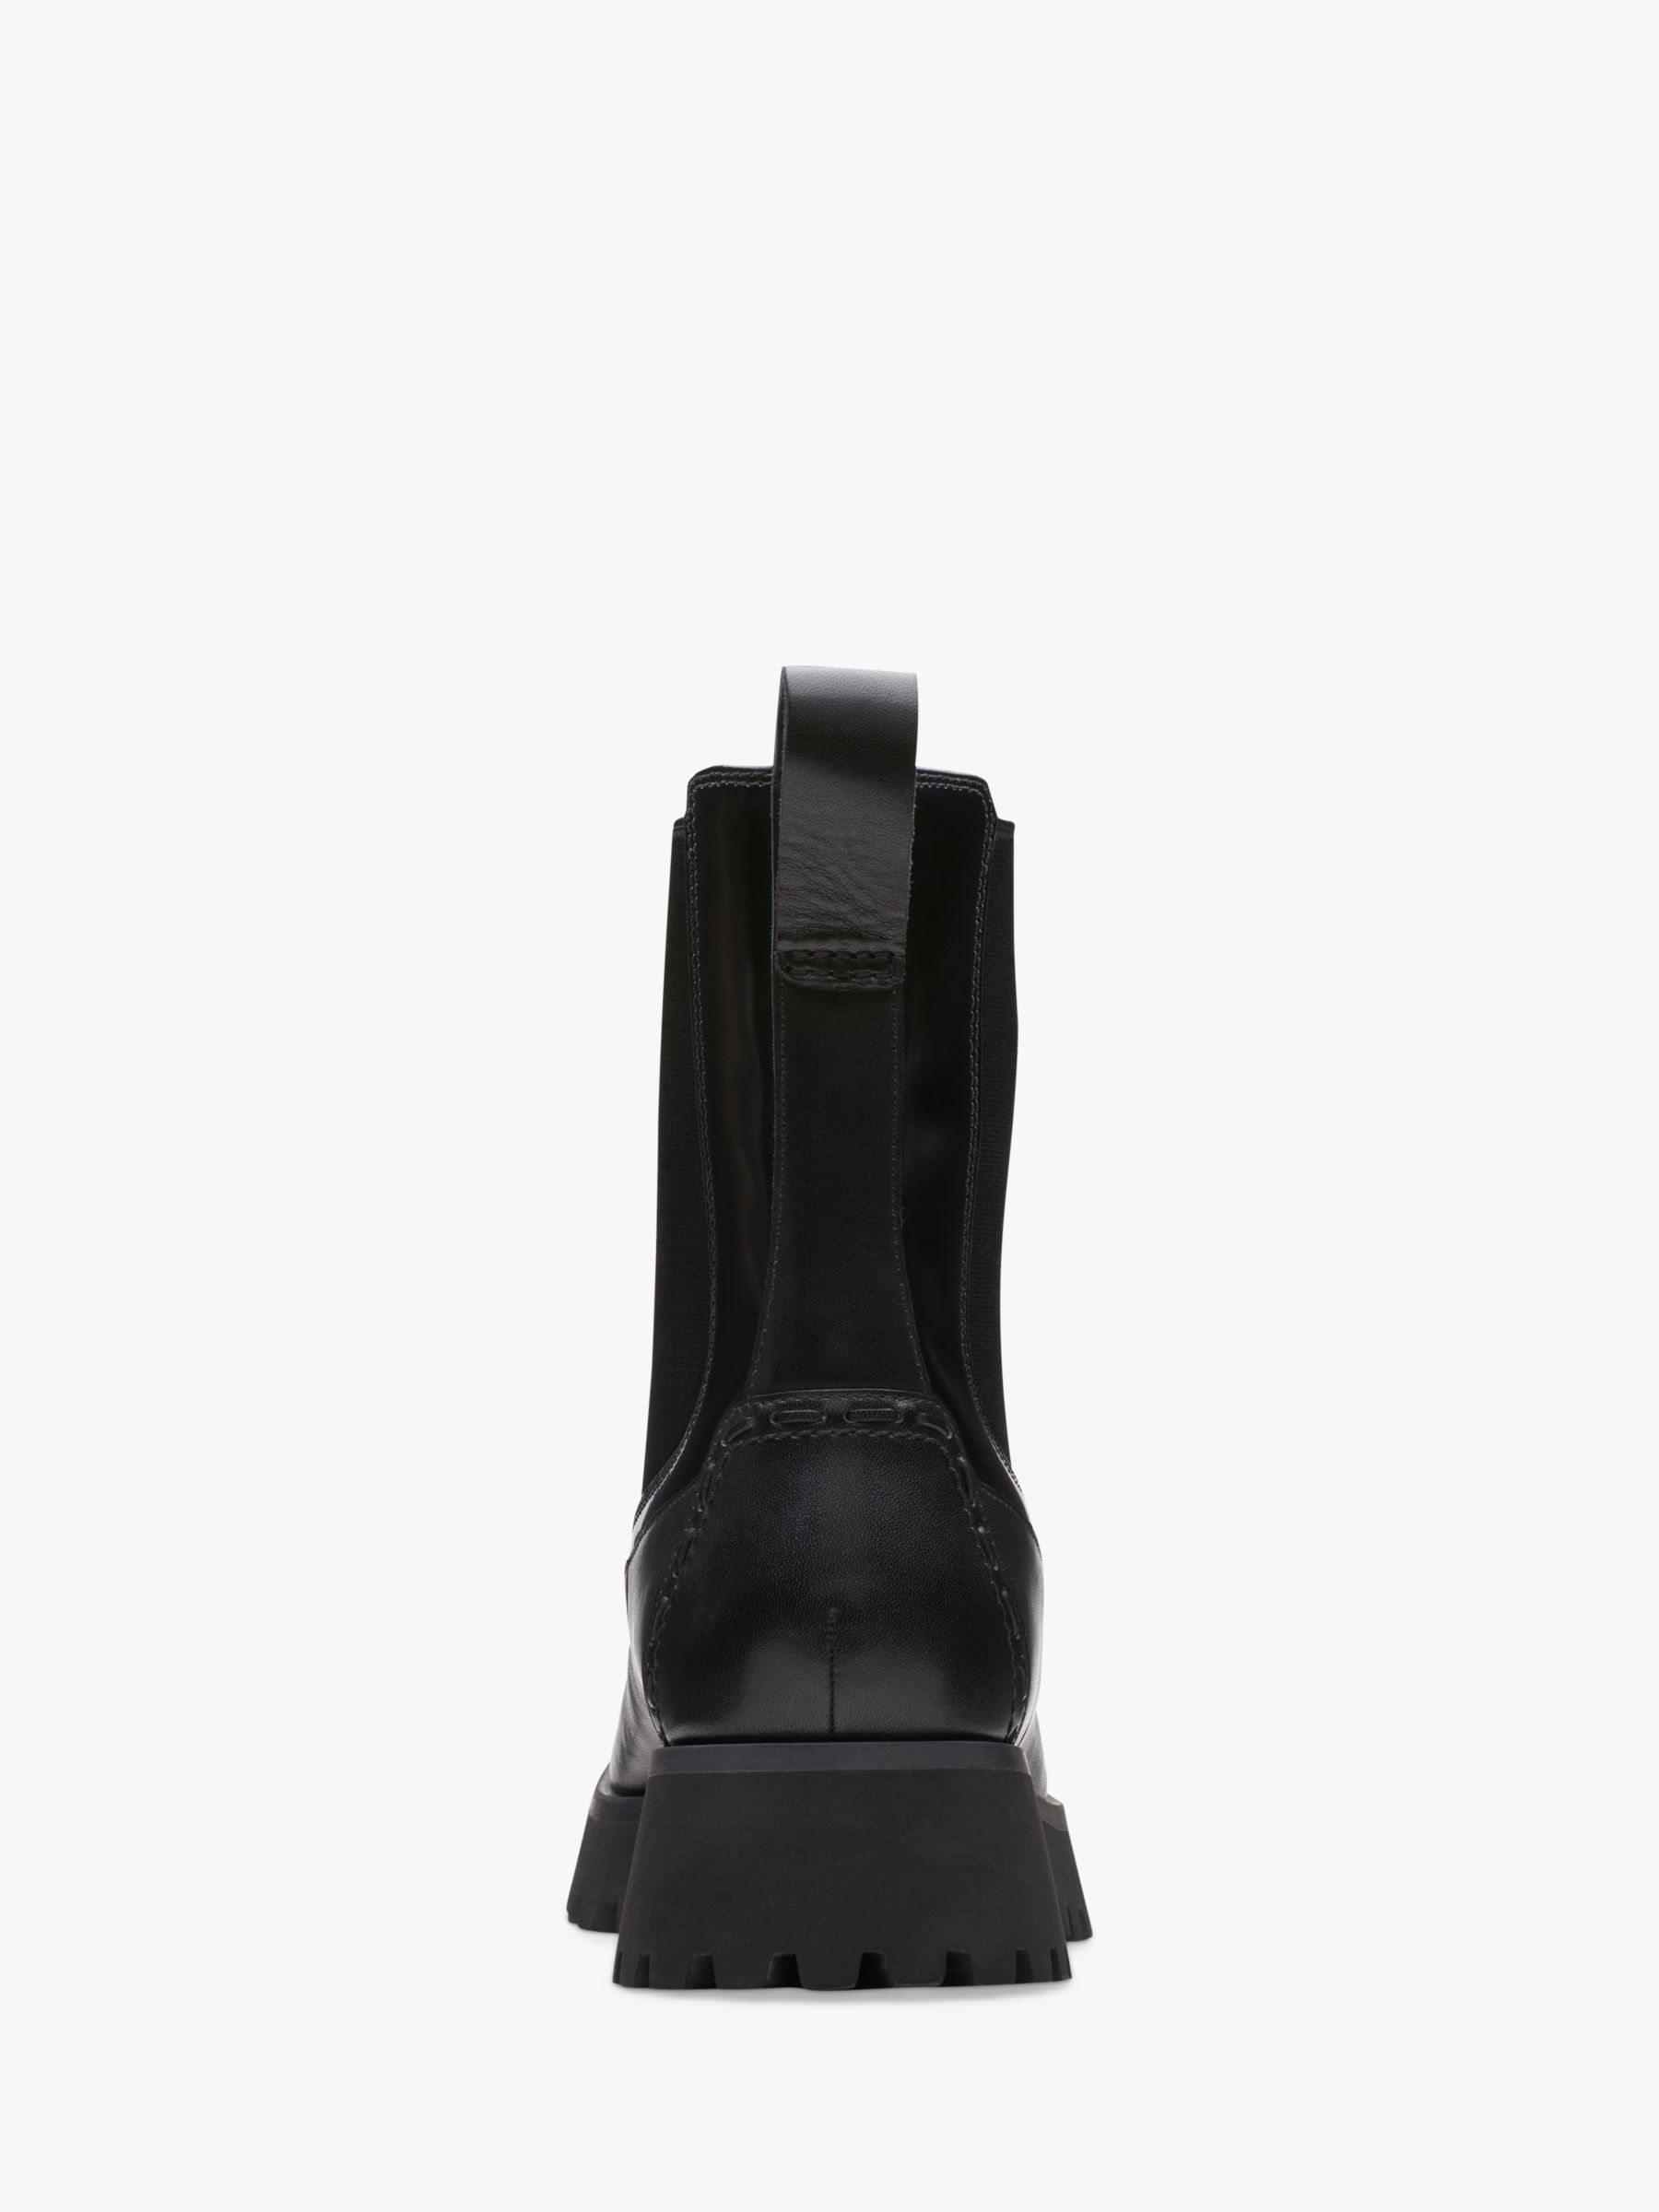 Clarks Stayso Rise Leather Chelsea Boots, Black at John Lewis & Partners